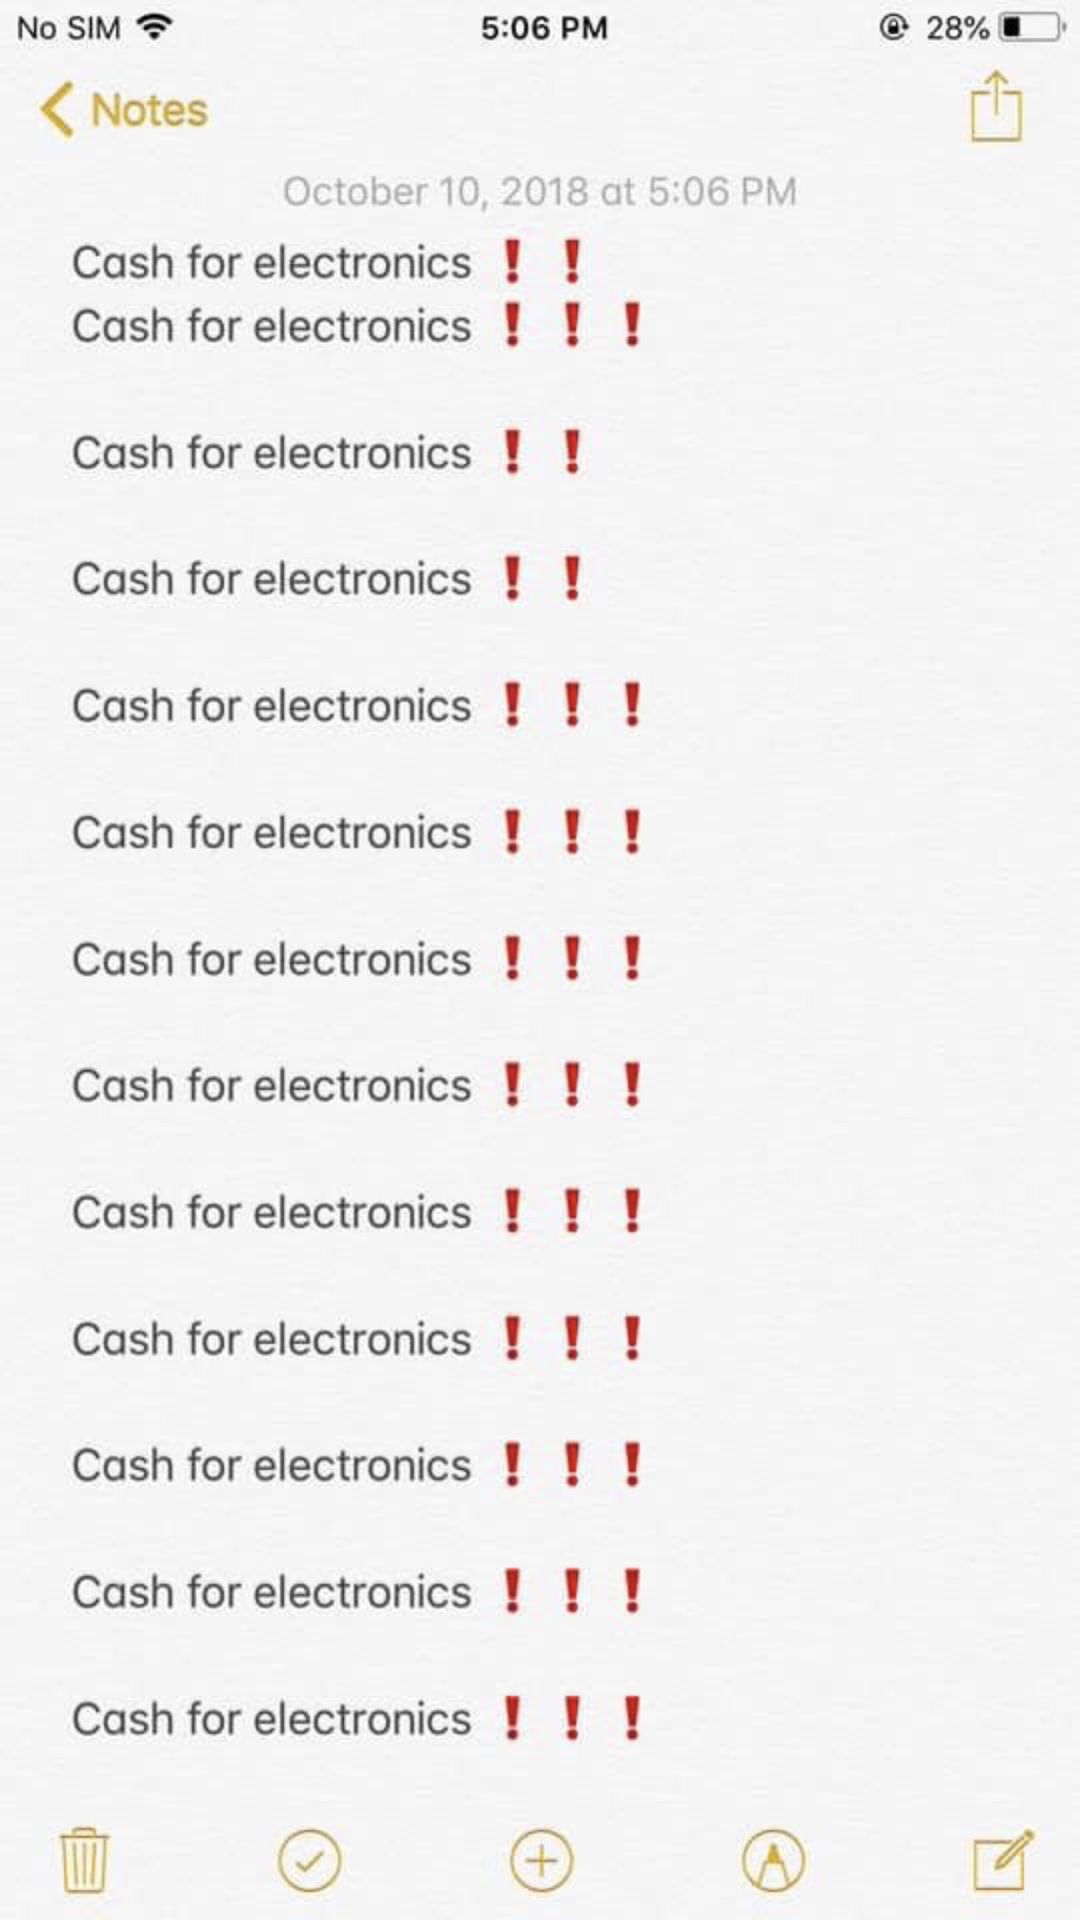 Cash for electronics